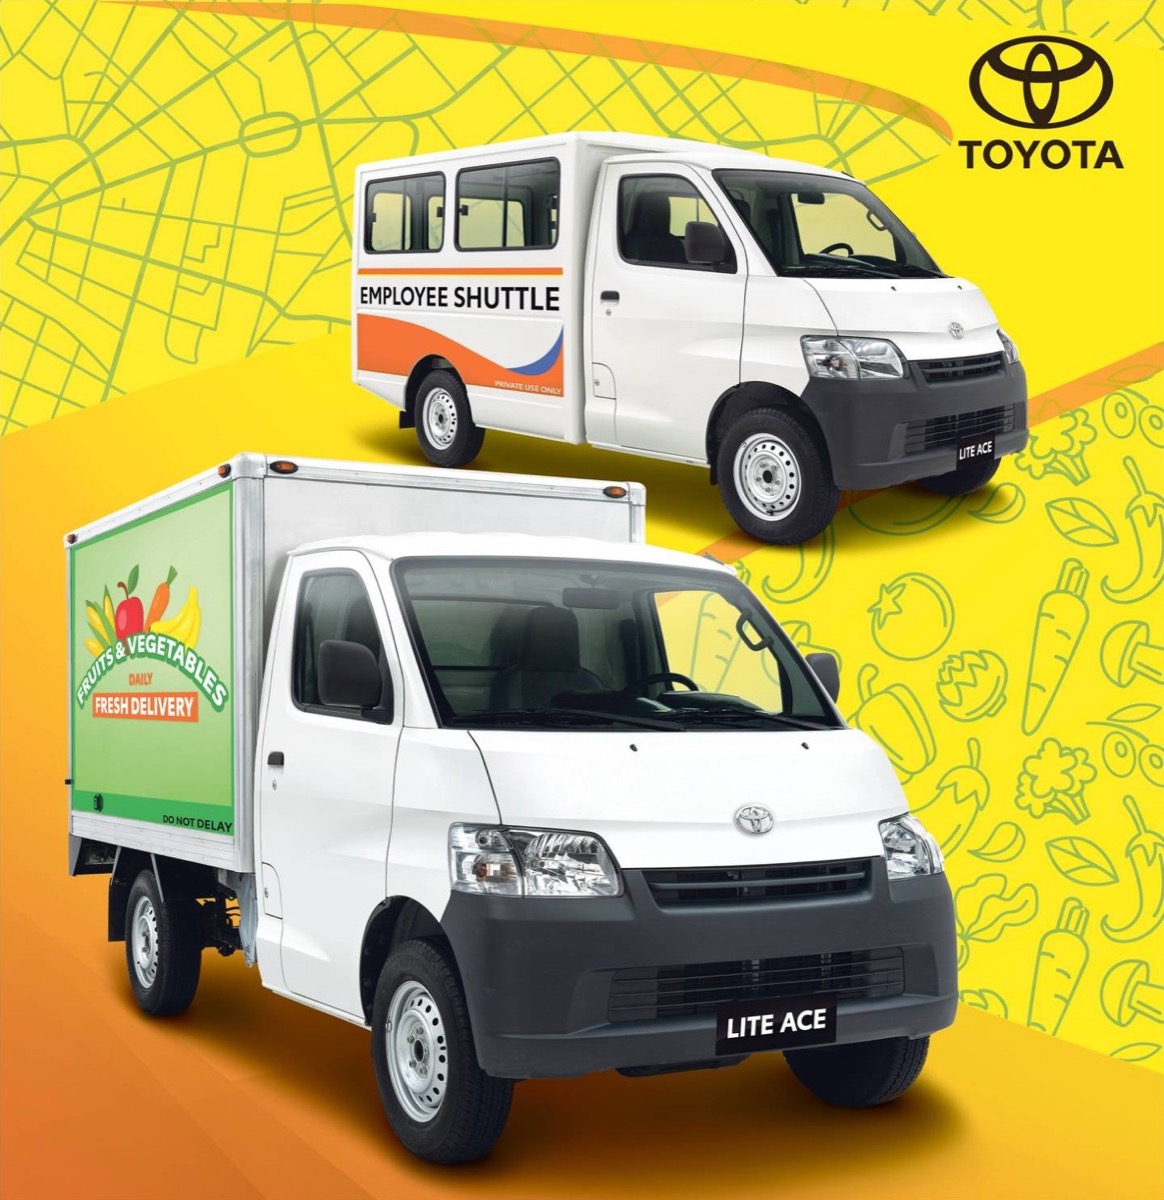 Empowering Communities with the AllNew Toyota Lite Ace Project Rebound